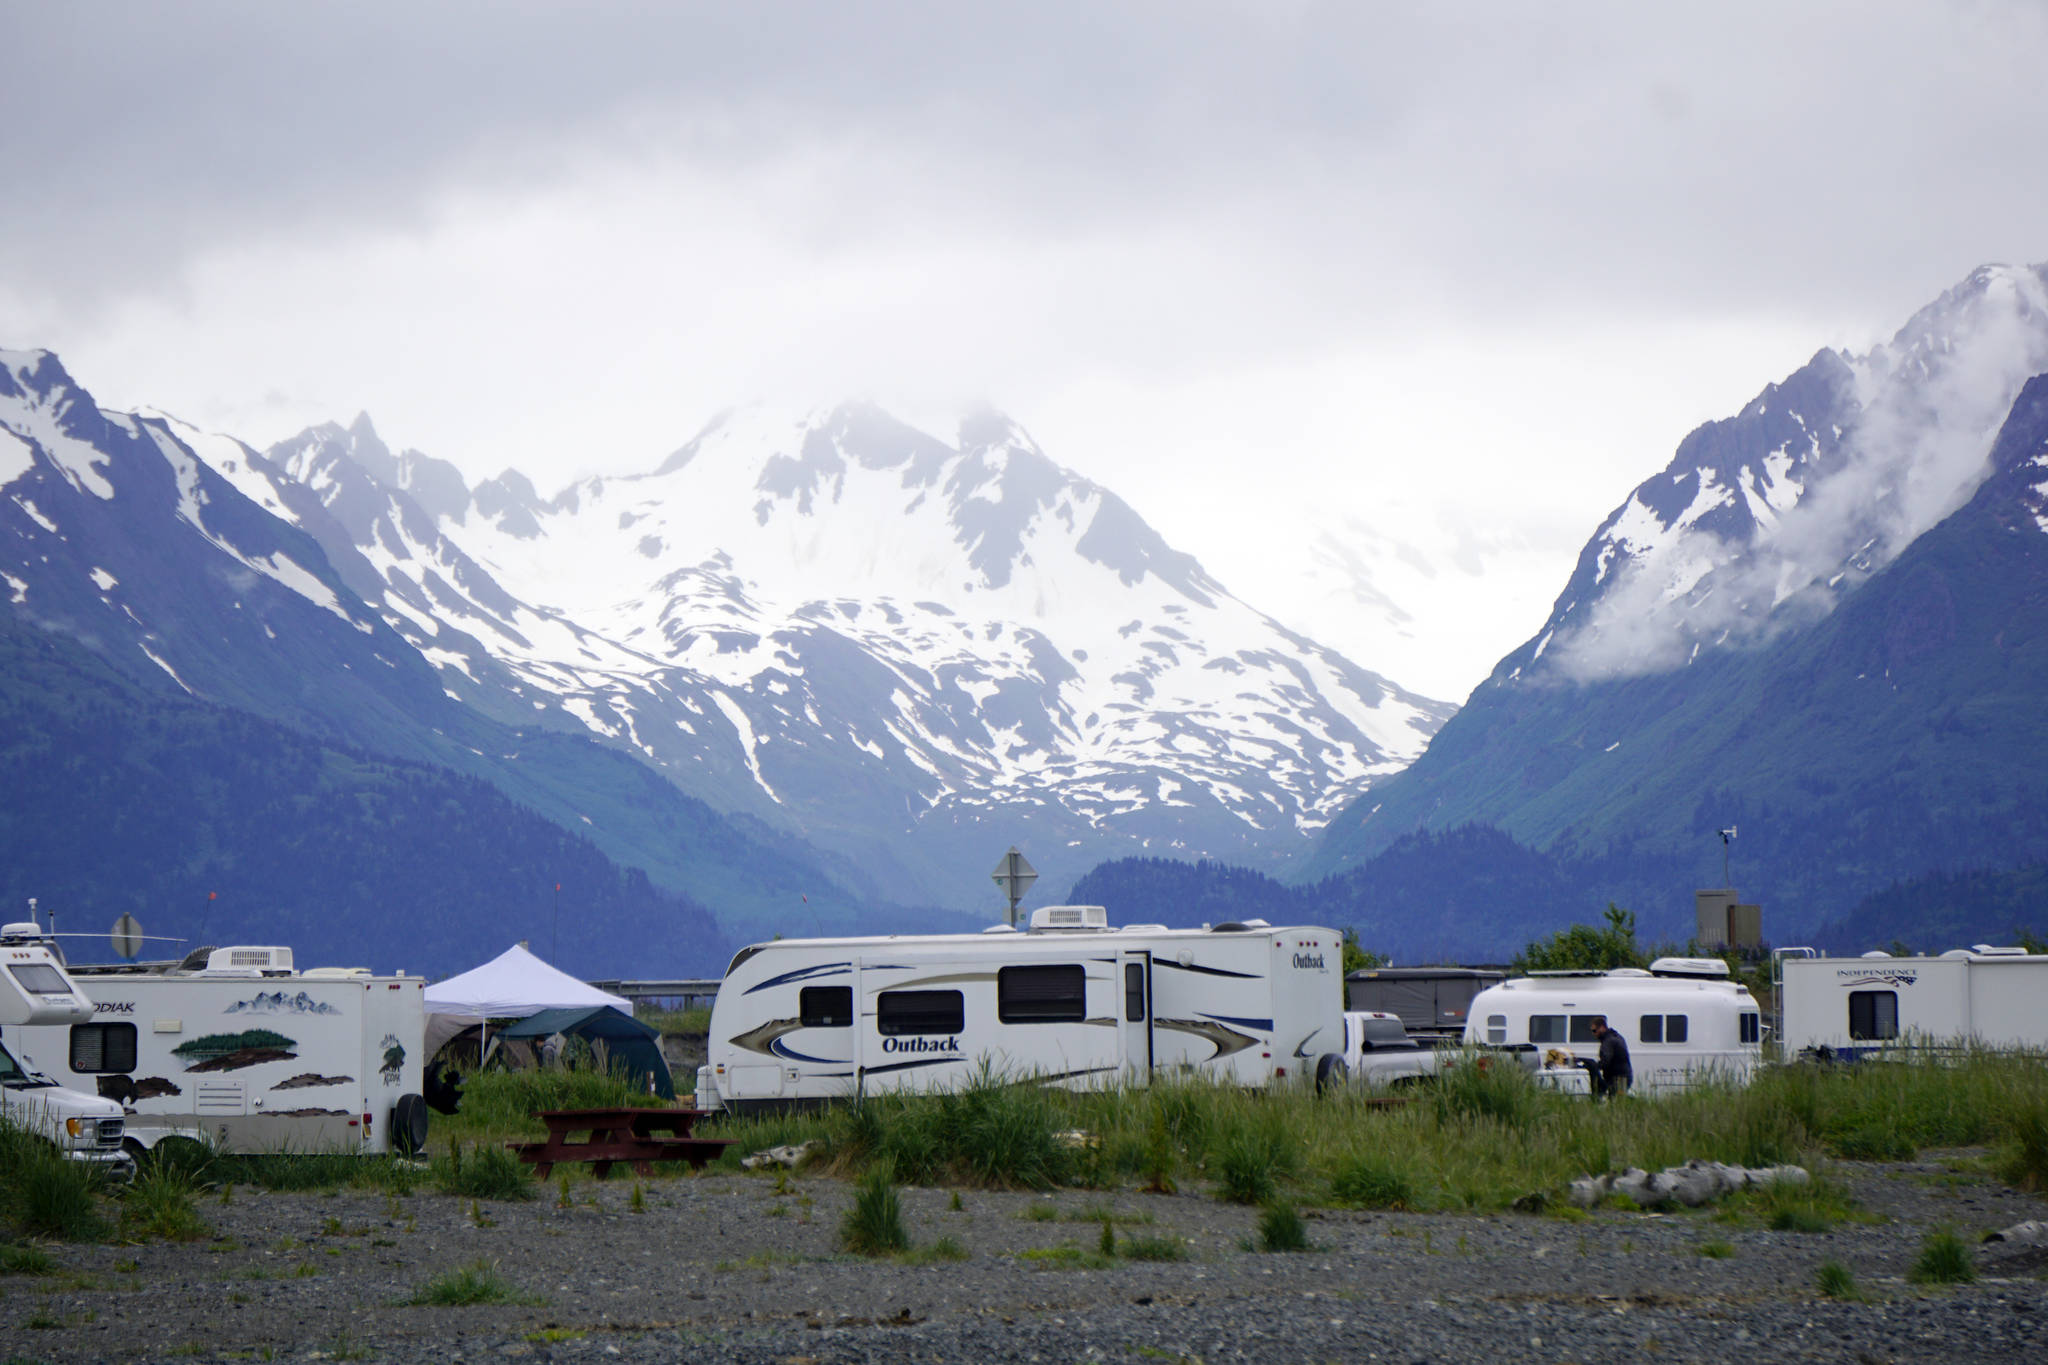 The Kenai Mountains across Kachemak Bay rise behind the Mariner Park Campground on the Homer Spit in Homer, Alaska, as seen on June 15, 2019. The city campground offers both tent and motorhome camping. Although the facilities are minimal, the beachfront view is amazing. (Photo by Michael Armstrong/Homer News)